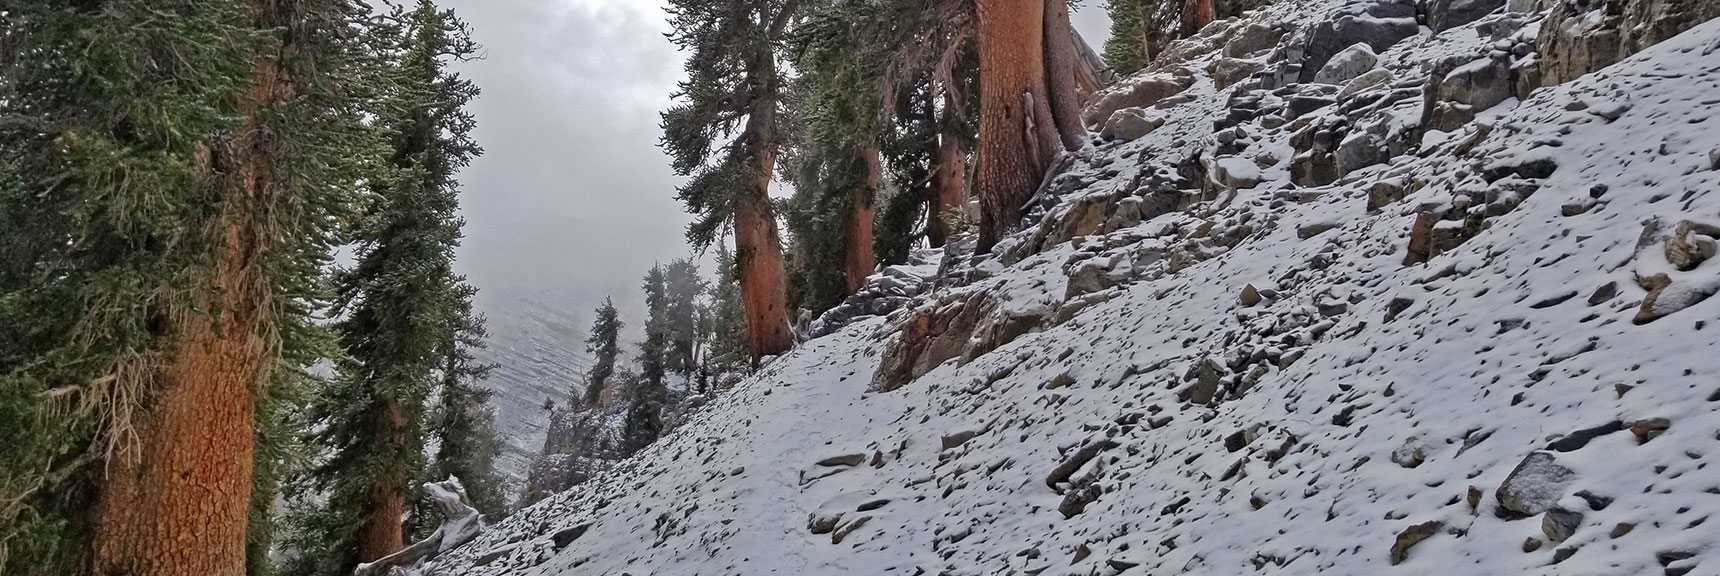 More Trail Along the Slope, Clouds Closing in Again | Charleston Peak Loop October Snow Dusting | Mt. Charleston Wilderness | Spring Mountains, Nevada